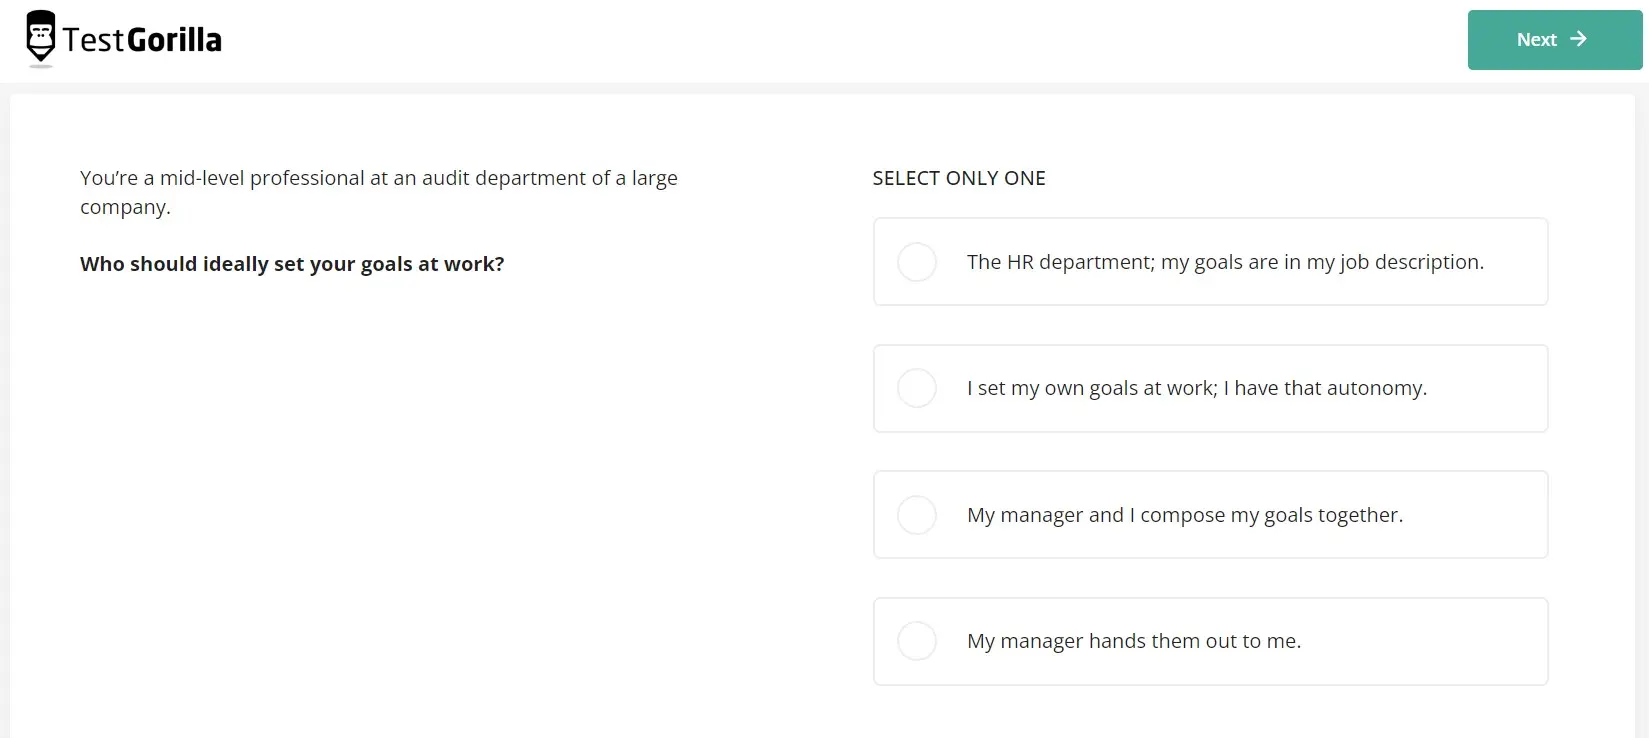 An example question from TestGorilla's Time Management test